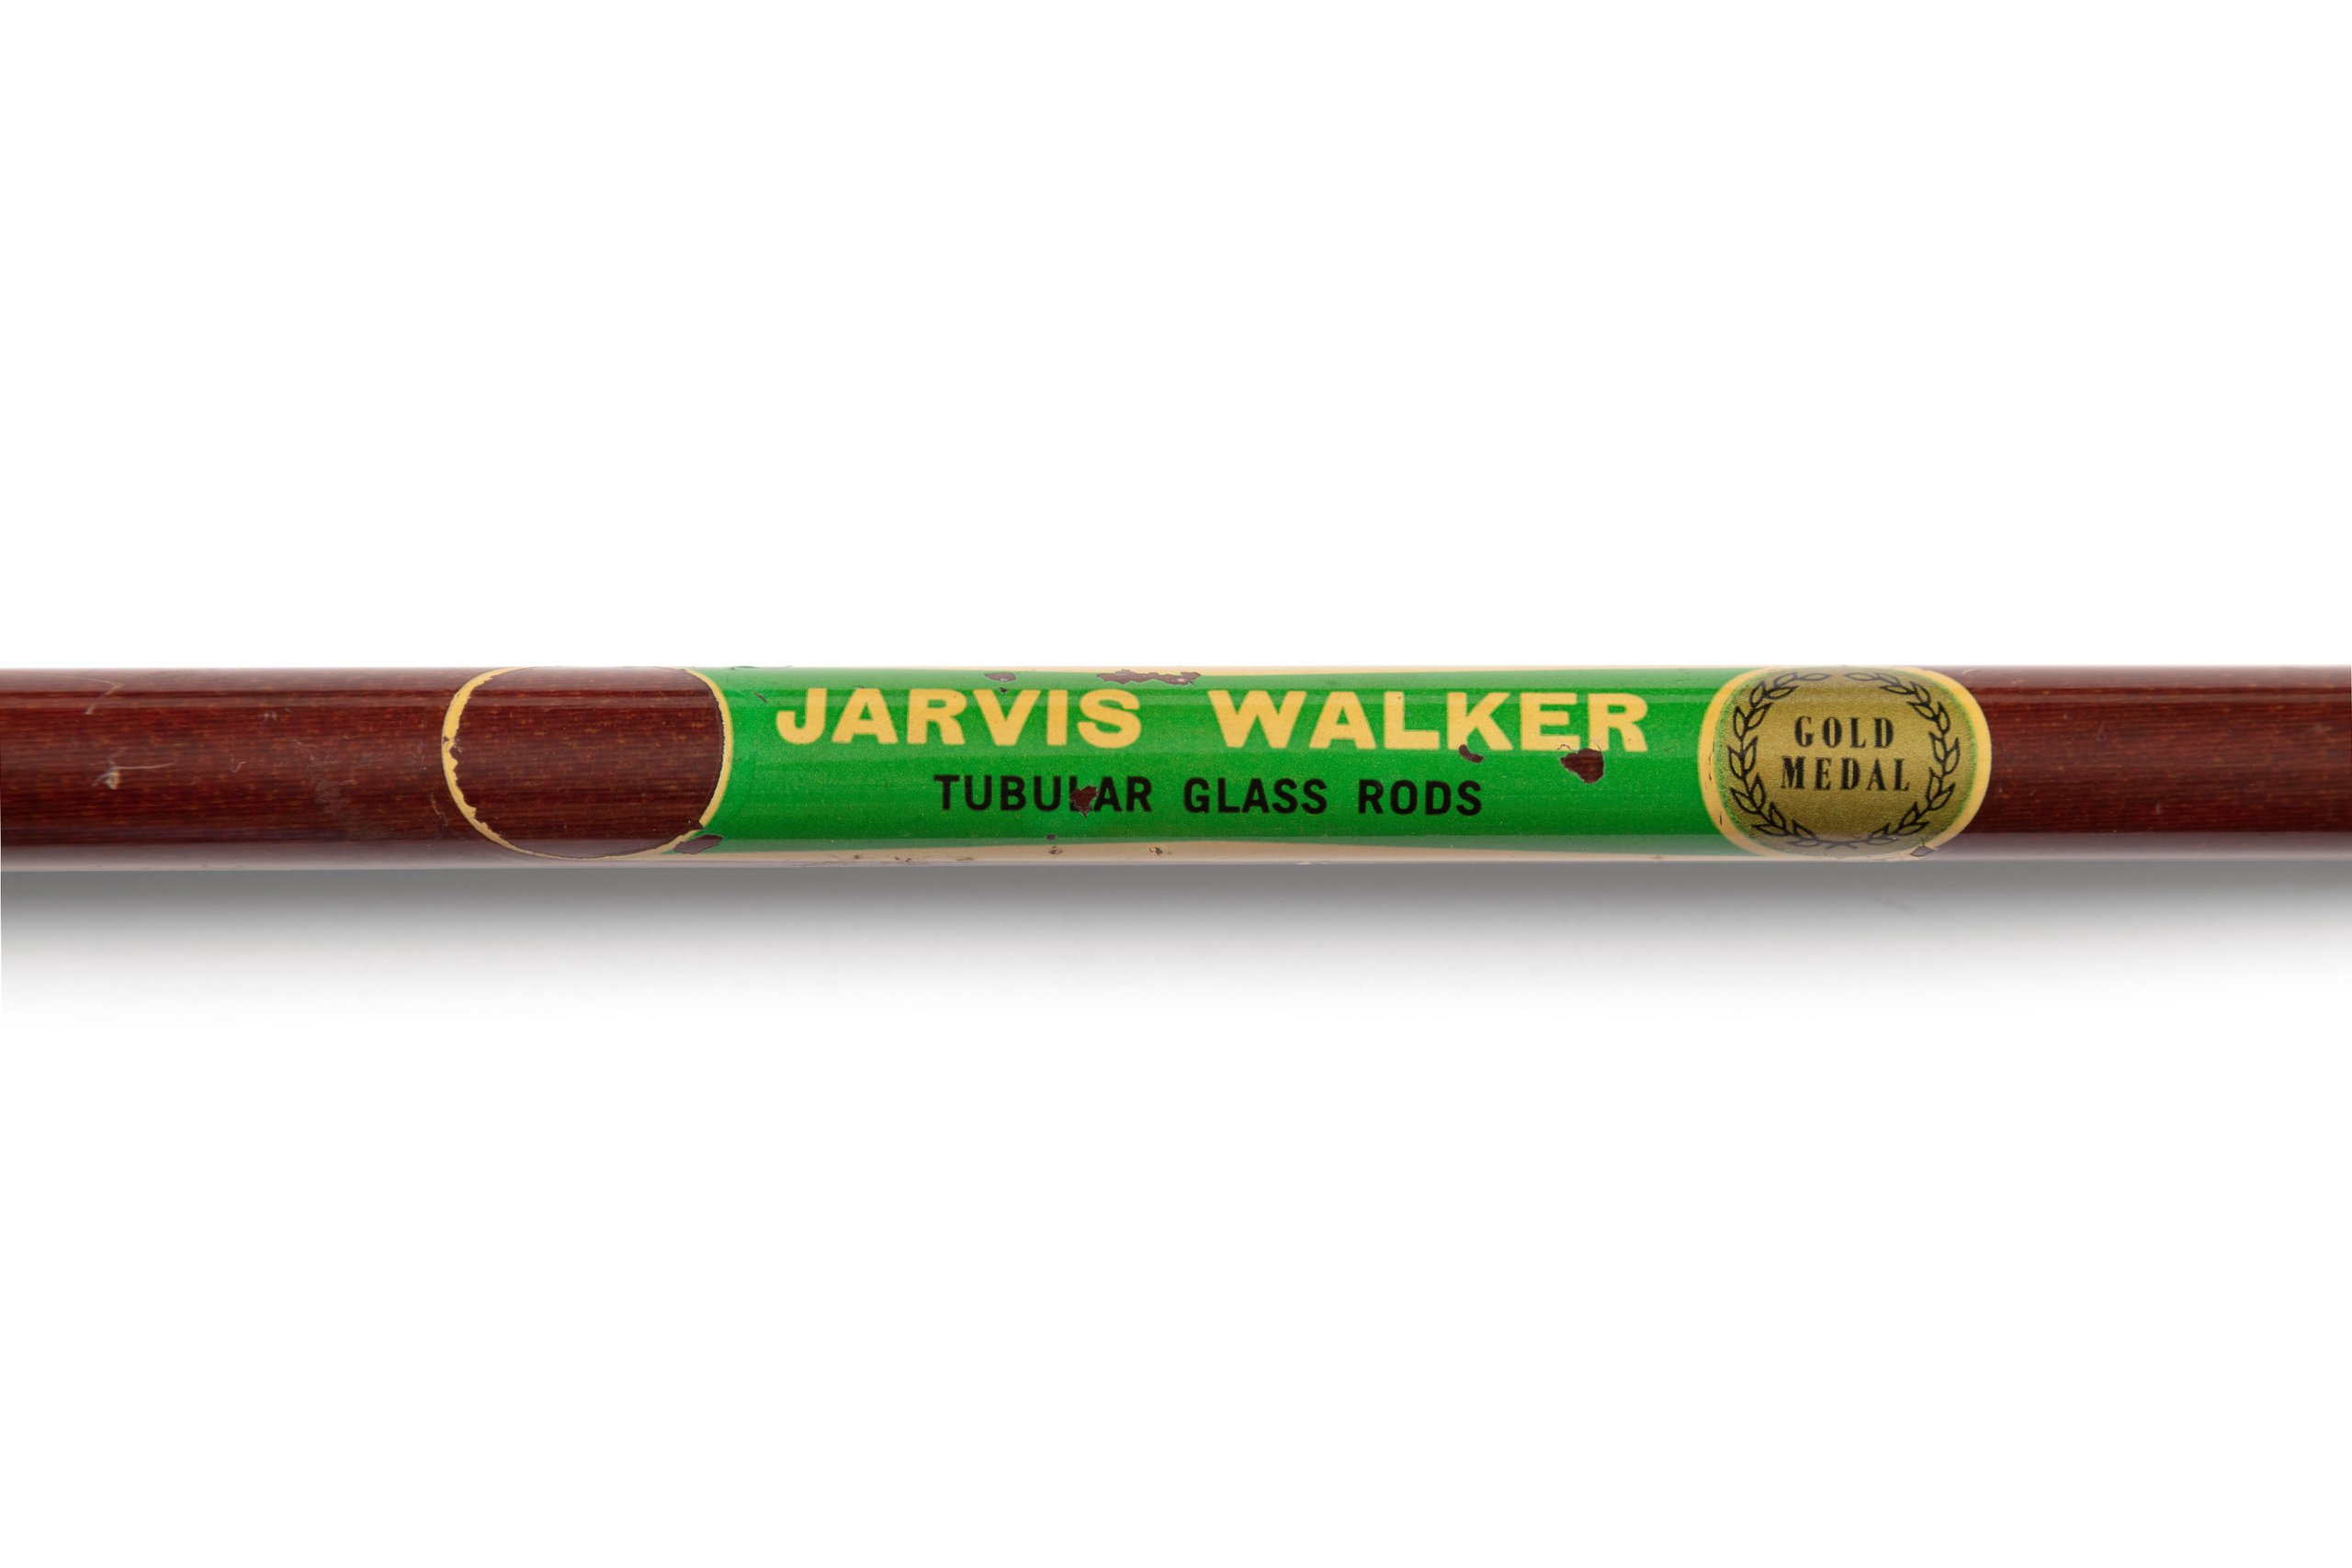 Two-piece fly fishing rod with accessories by Jarvis Walker